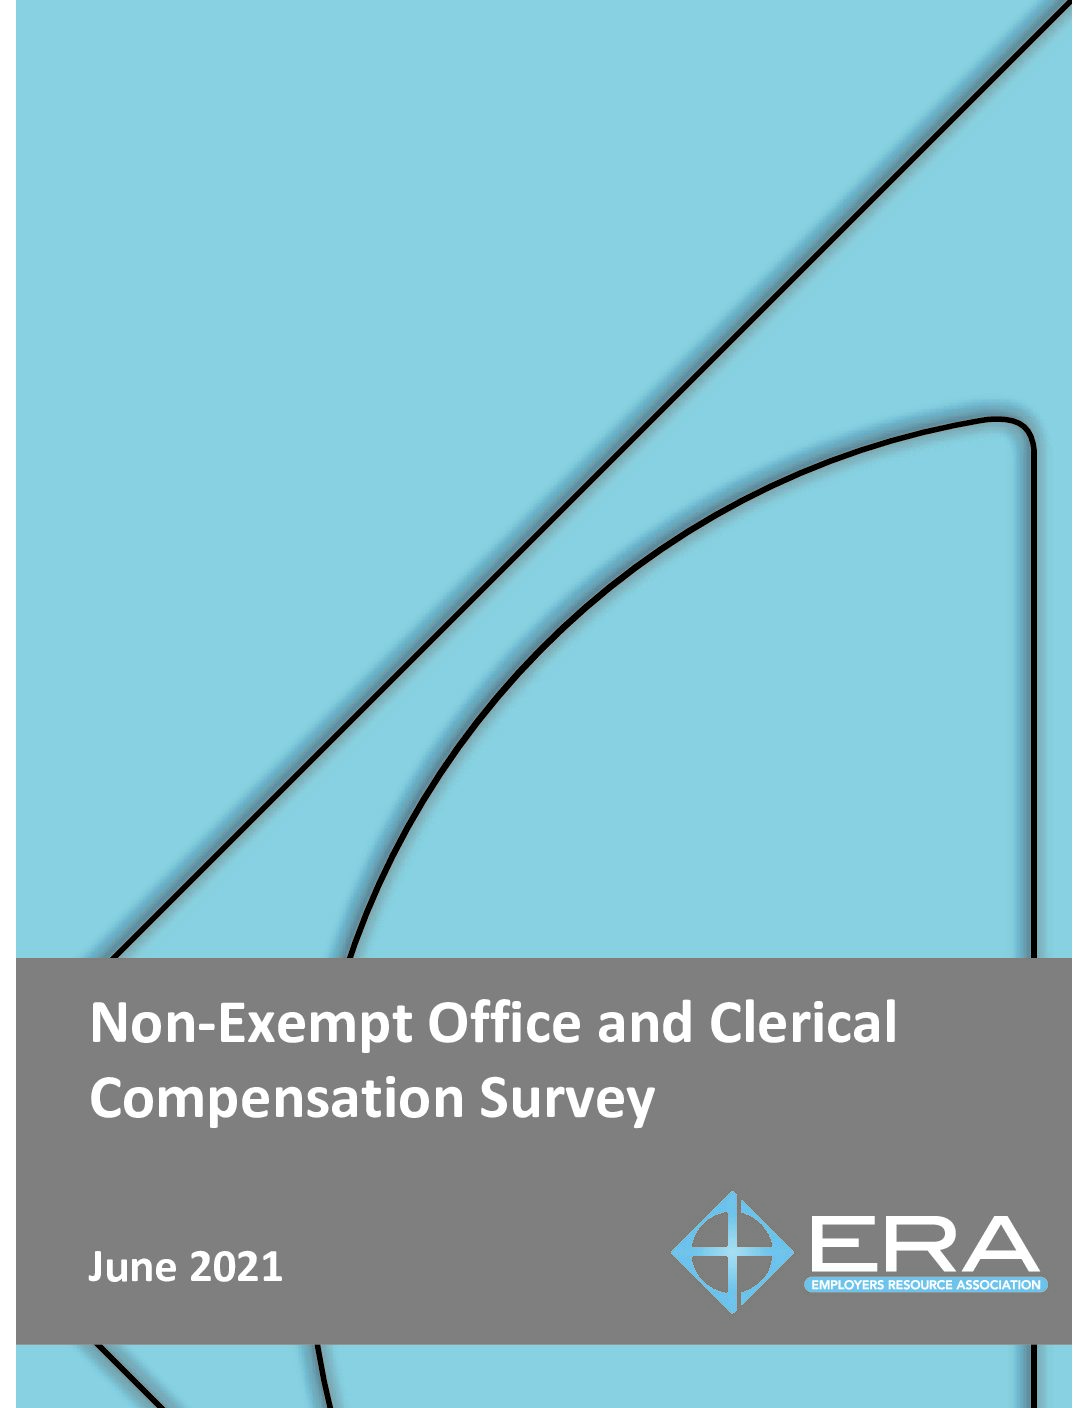 2021 Non-Exempt Office and Clerical Personnel Compensation Survey